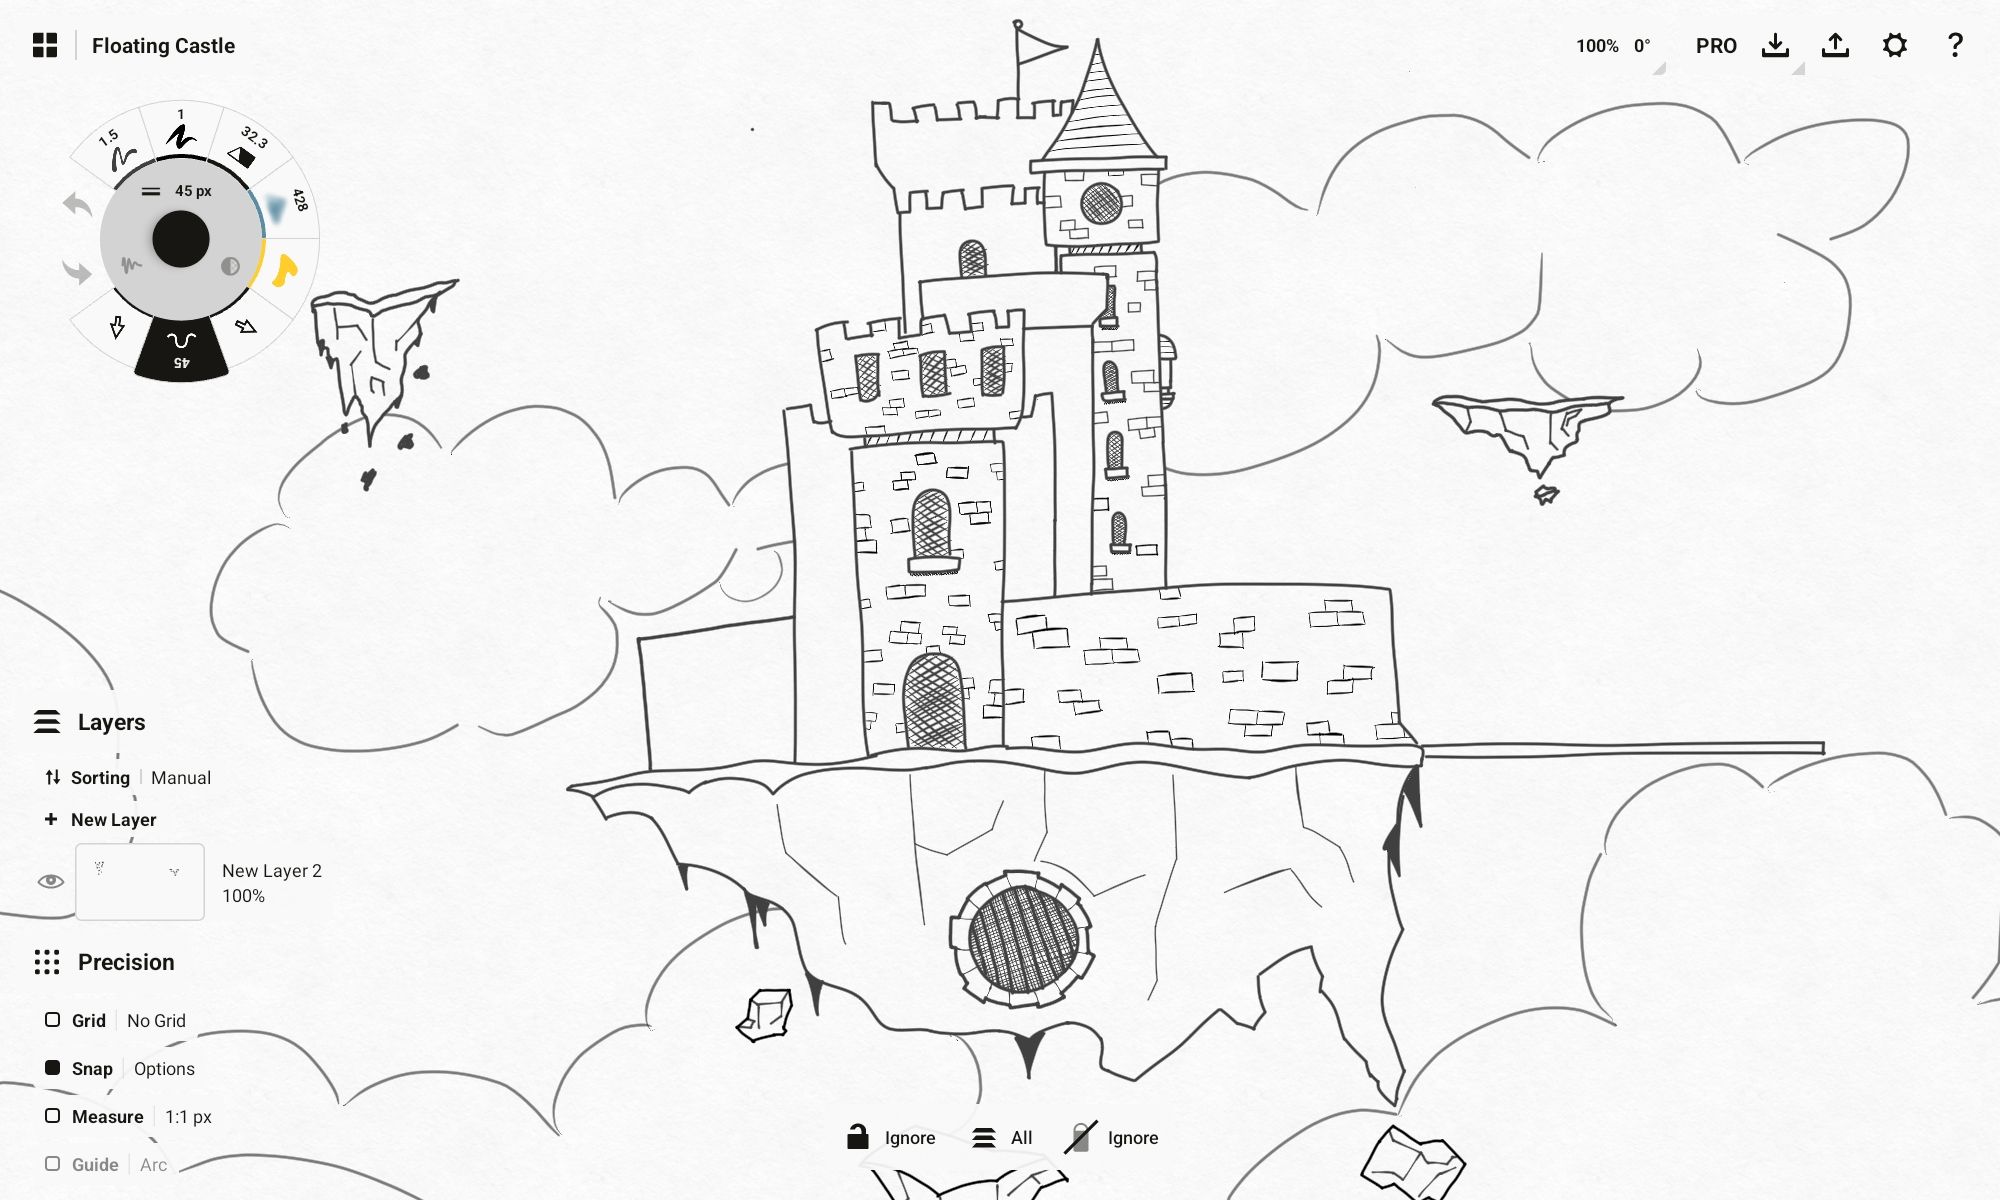 Drawing a floating castle in Concepts on Android.